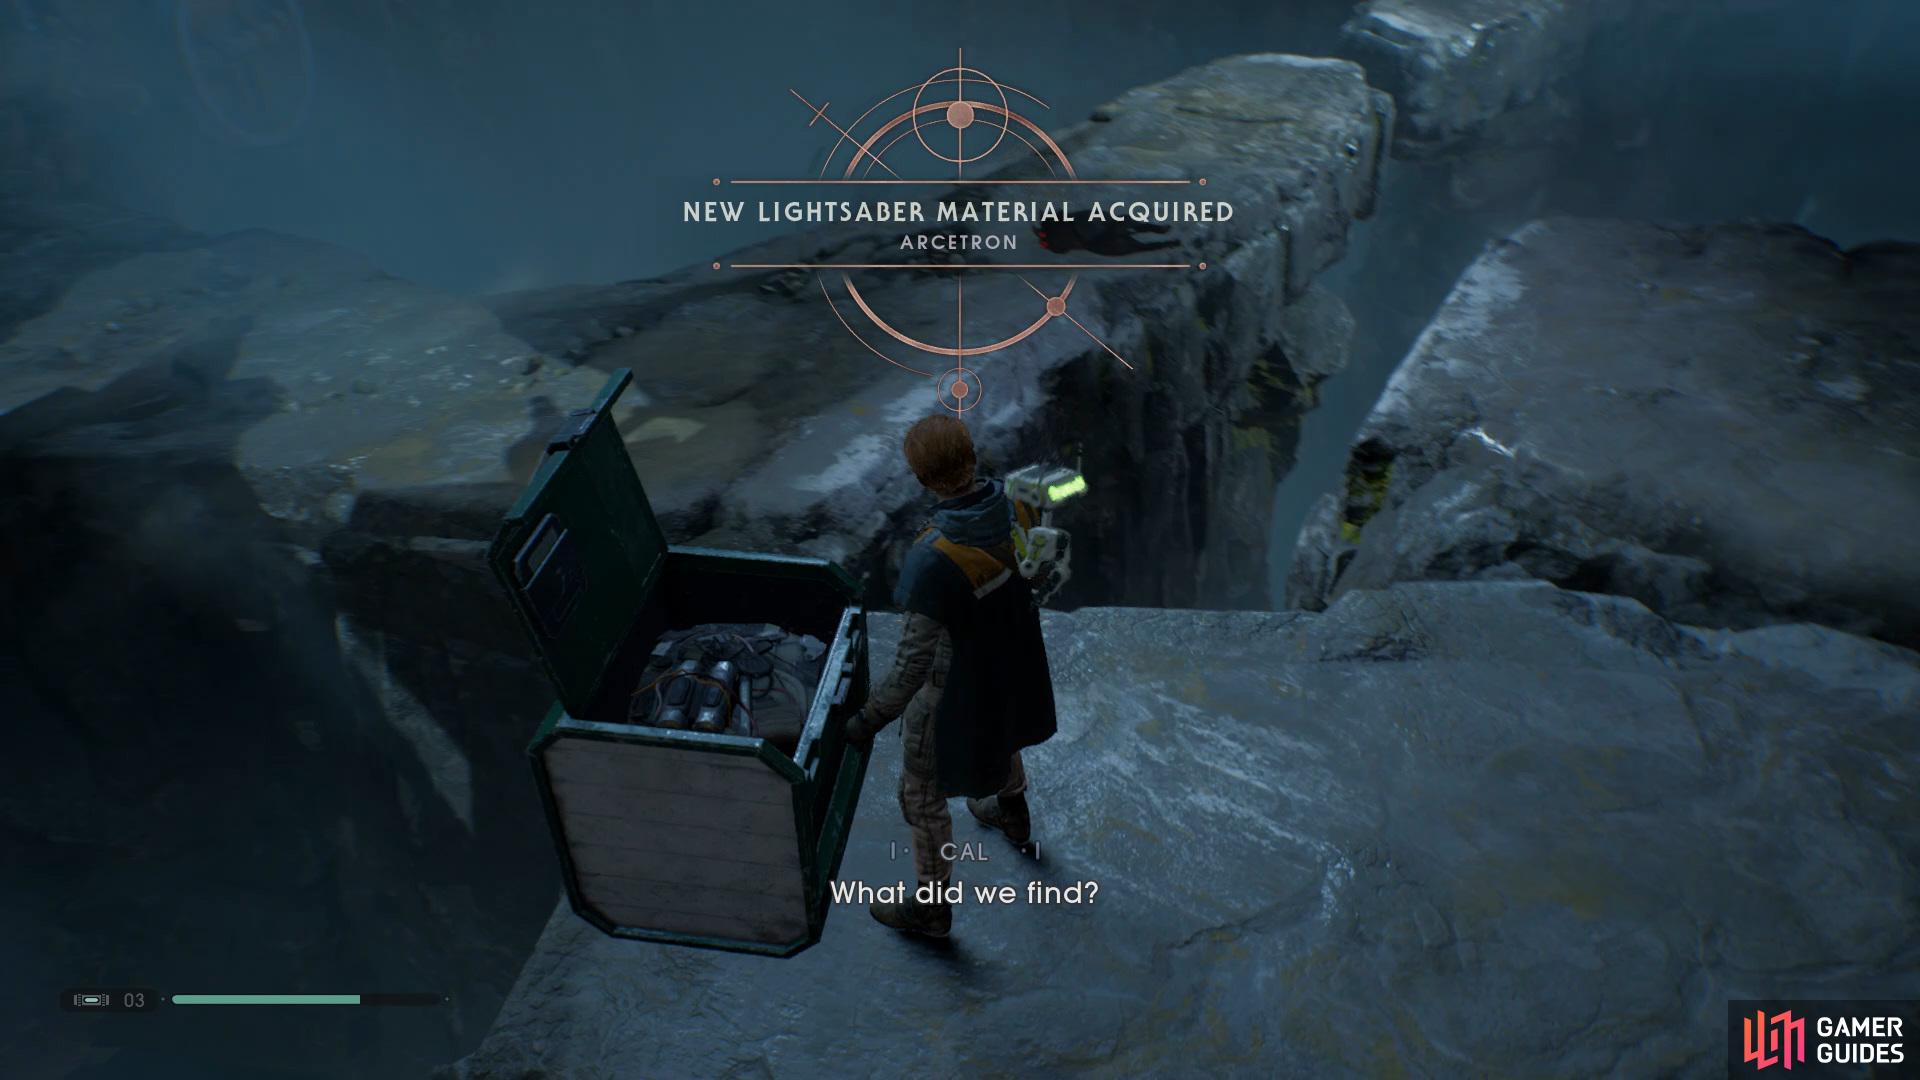 Follow the path right in the Ice Caves to find a Chest that contains the Arcetron Lightsaber Material.